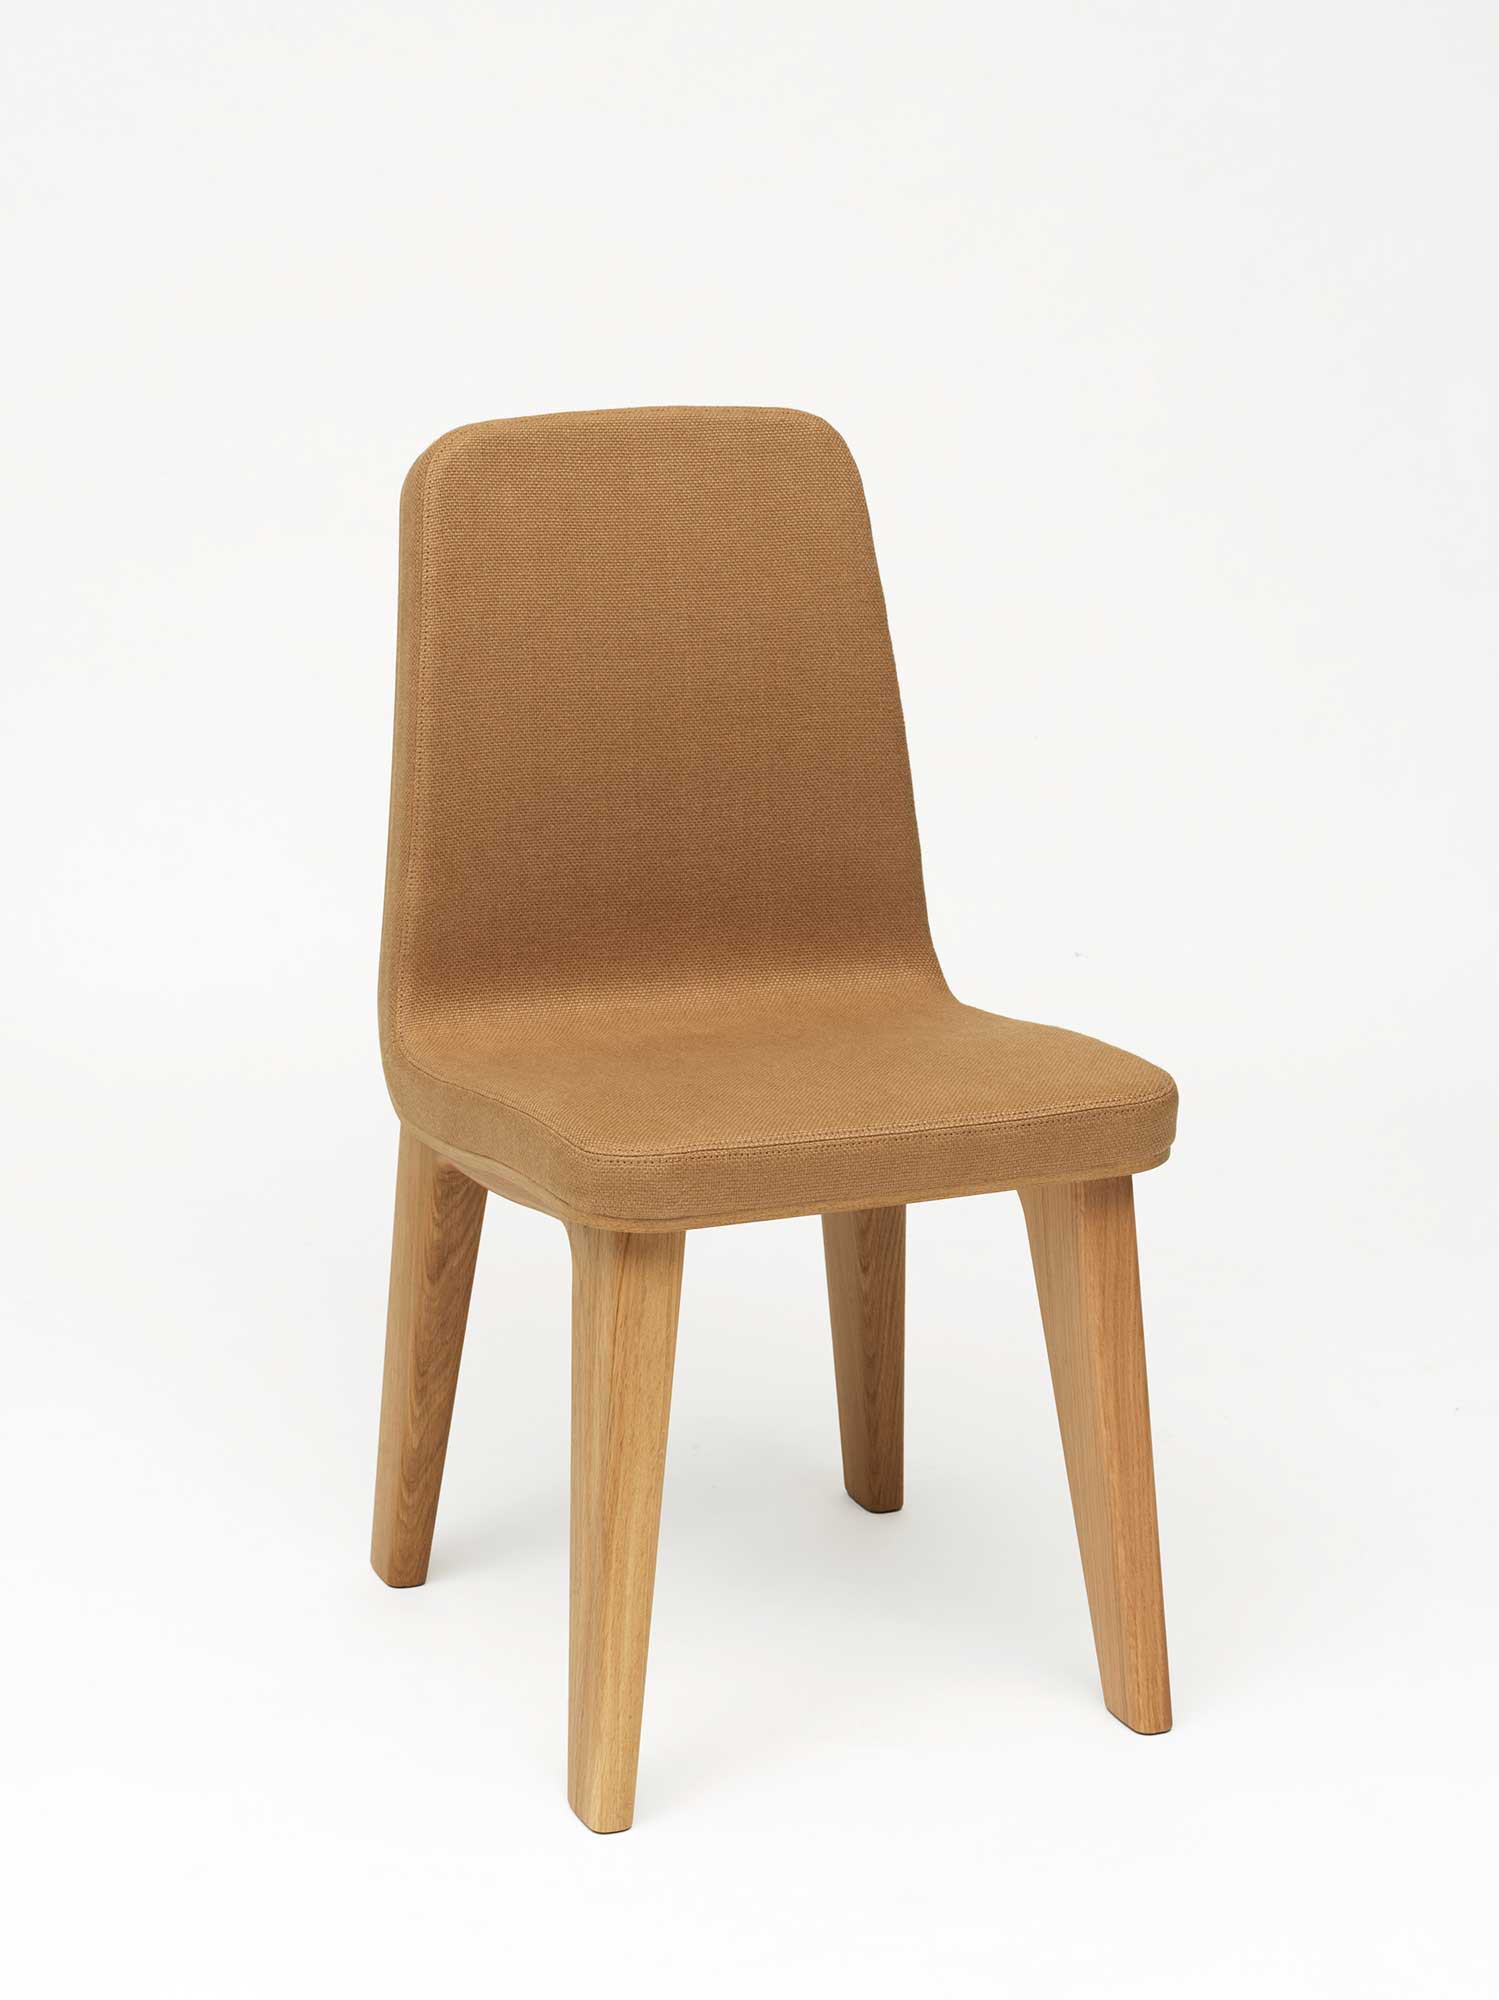 Marc Newson, prototype Wooden chair